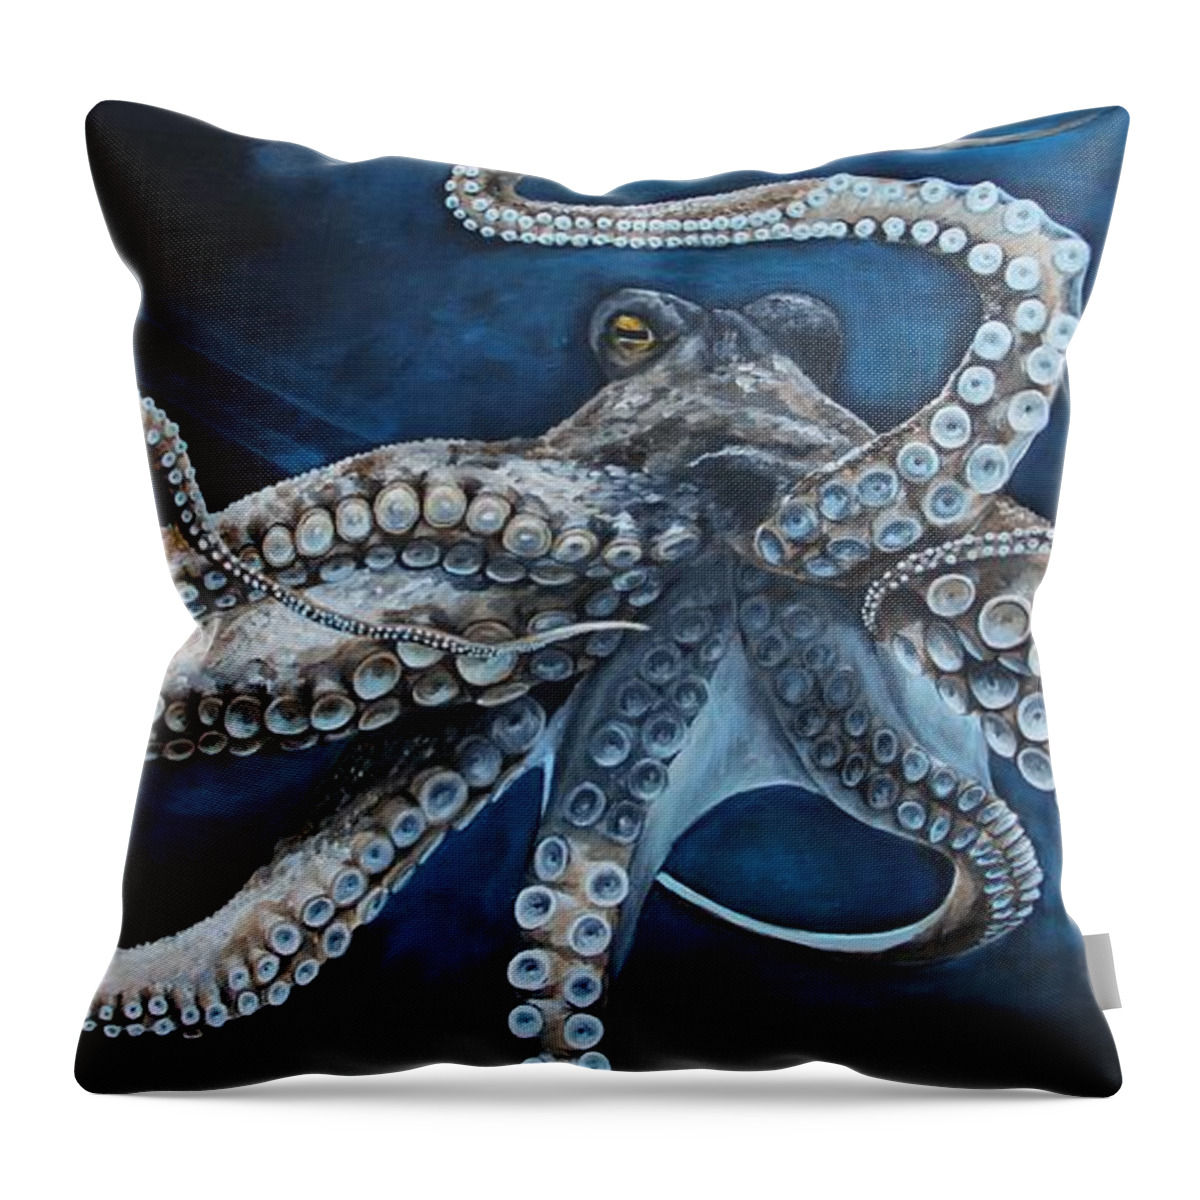 Octopus Throw Pillow featuring the painting Octopus by Alyssa Davis